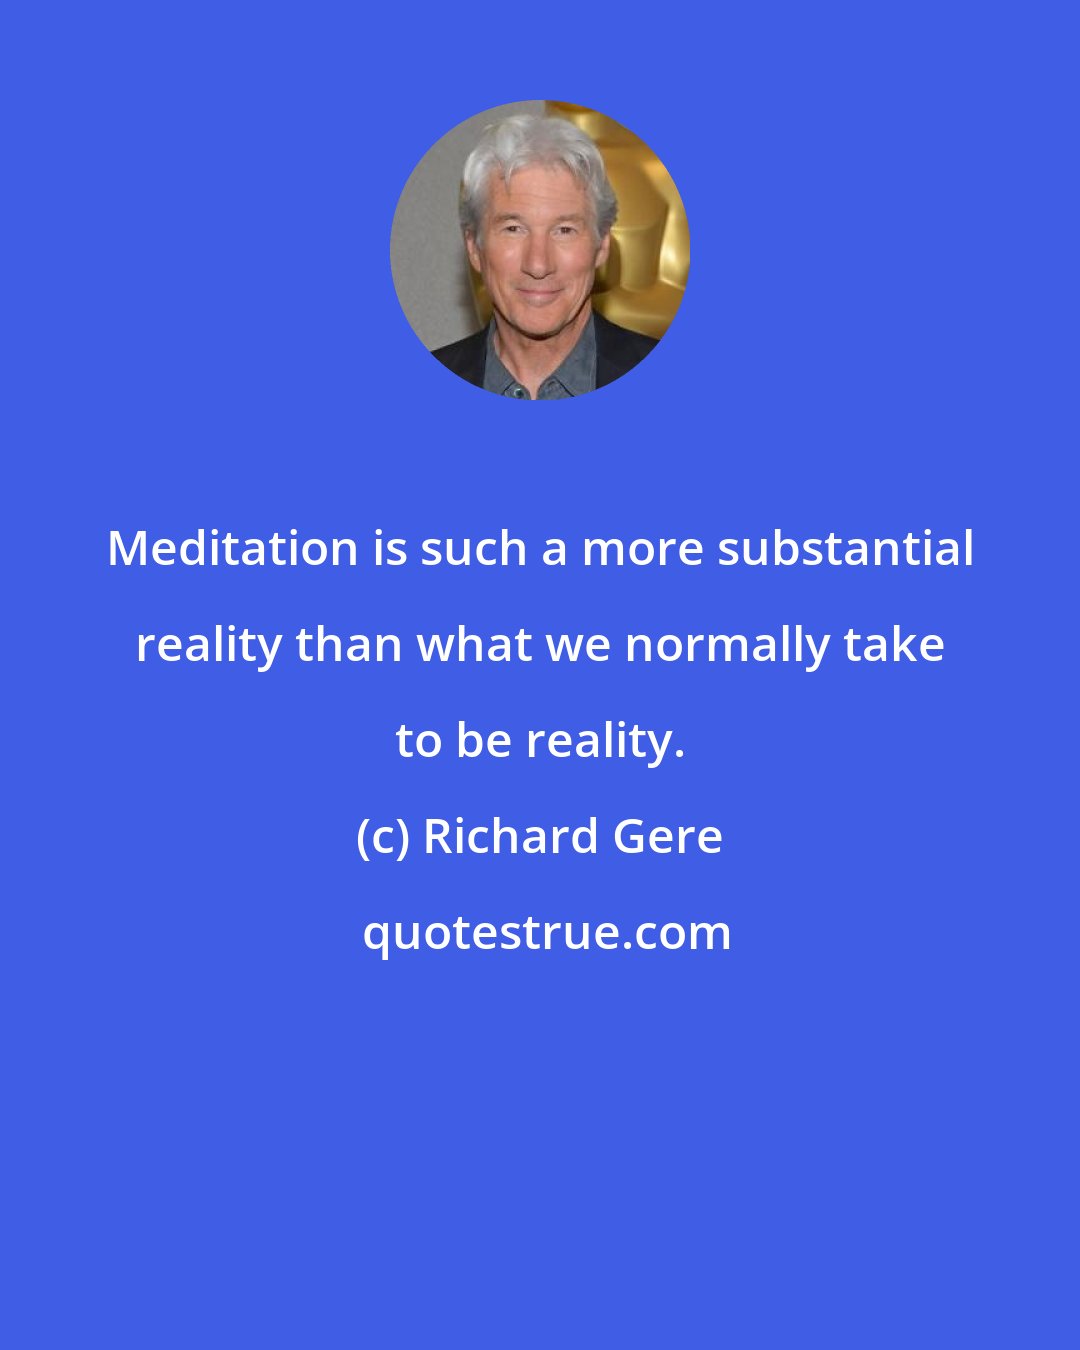 Richard Gere: Meditation is such a more substantial reality than what we normally take to be reality.